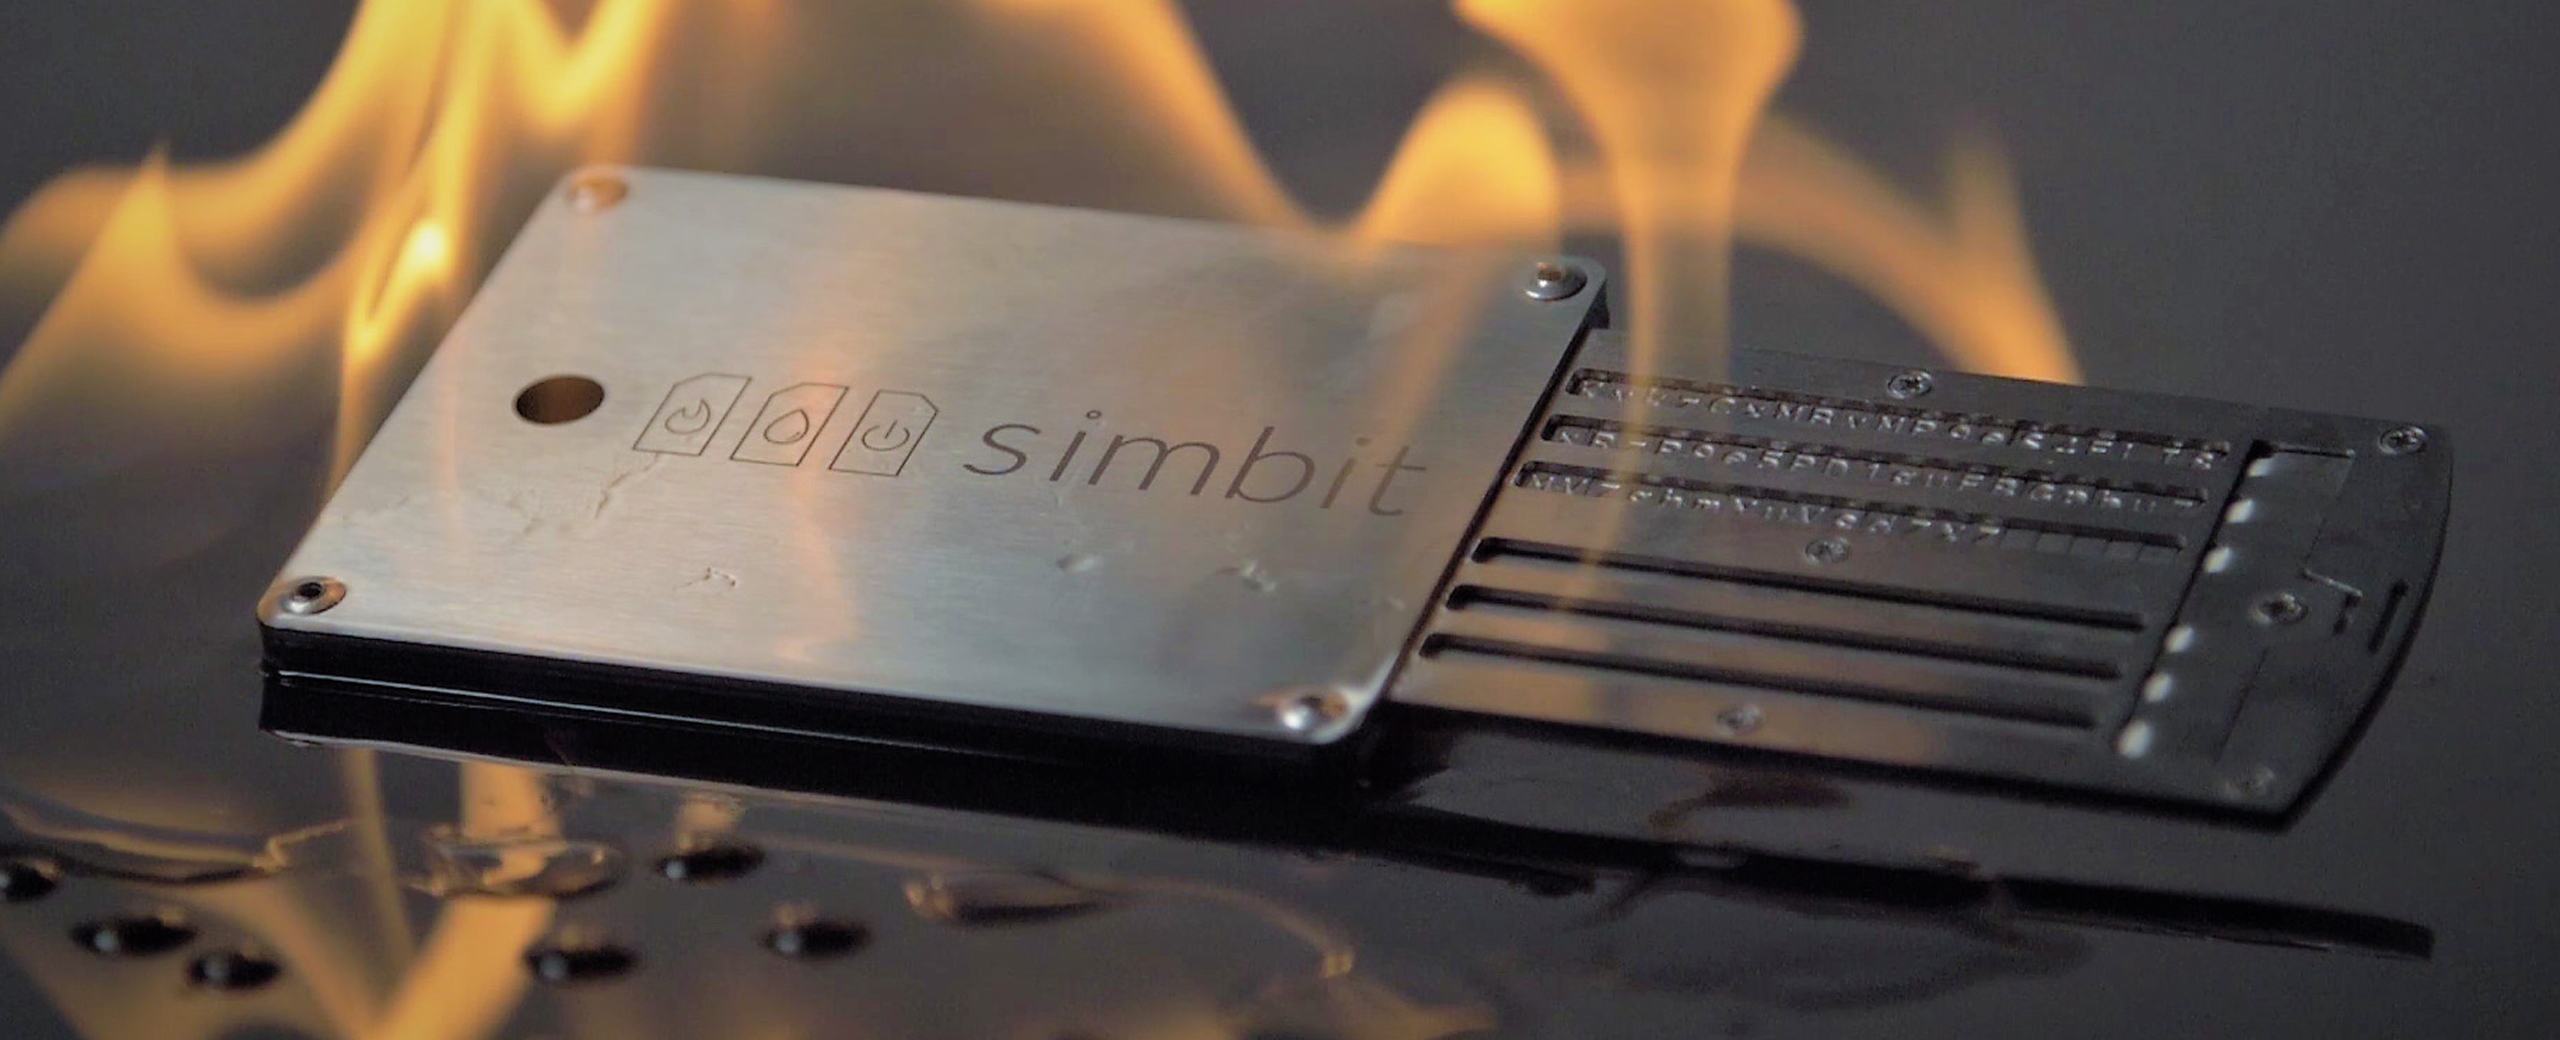 7 Steel Crypto Wallets That Withstand Extreme Fire and ...